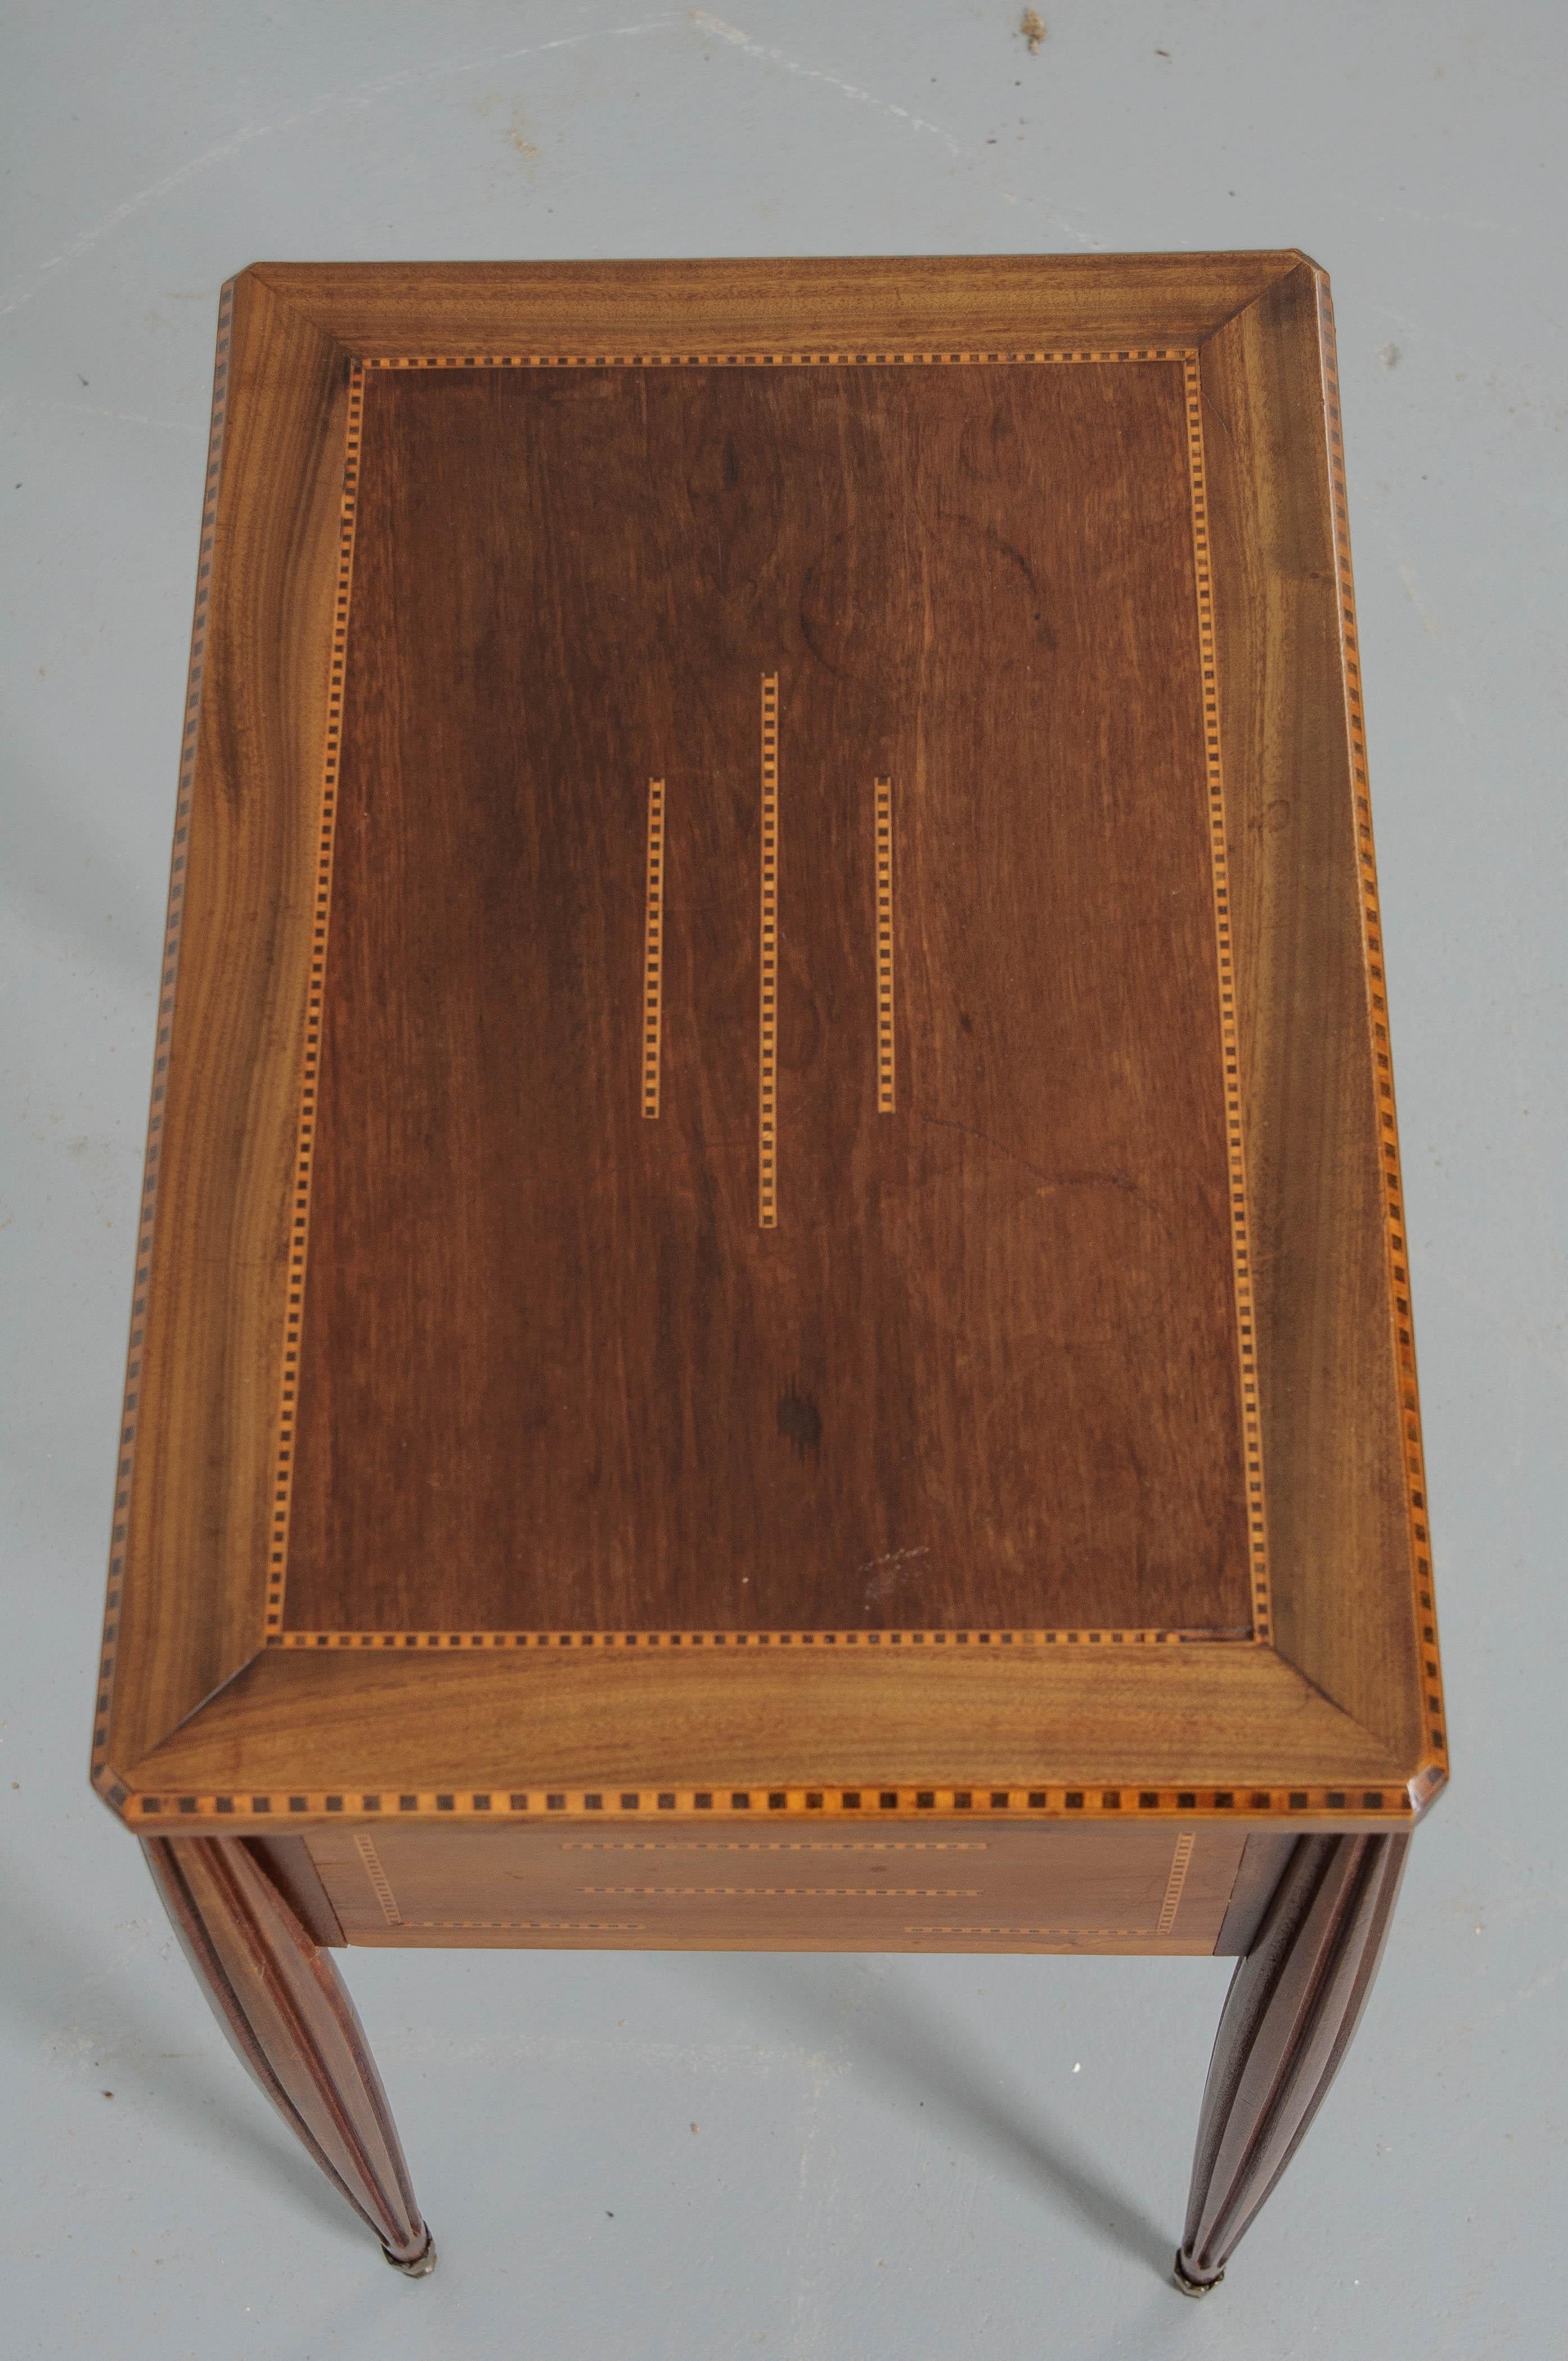 French, Art Deco style, mahogany table with patterned satinwood and ebony inlay on all five surfaces. The tabletop lifts open and is held open with a chain connection, revealing a storage area divided into three parts. A faux drawer front has two